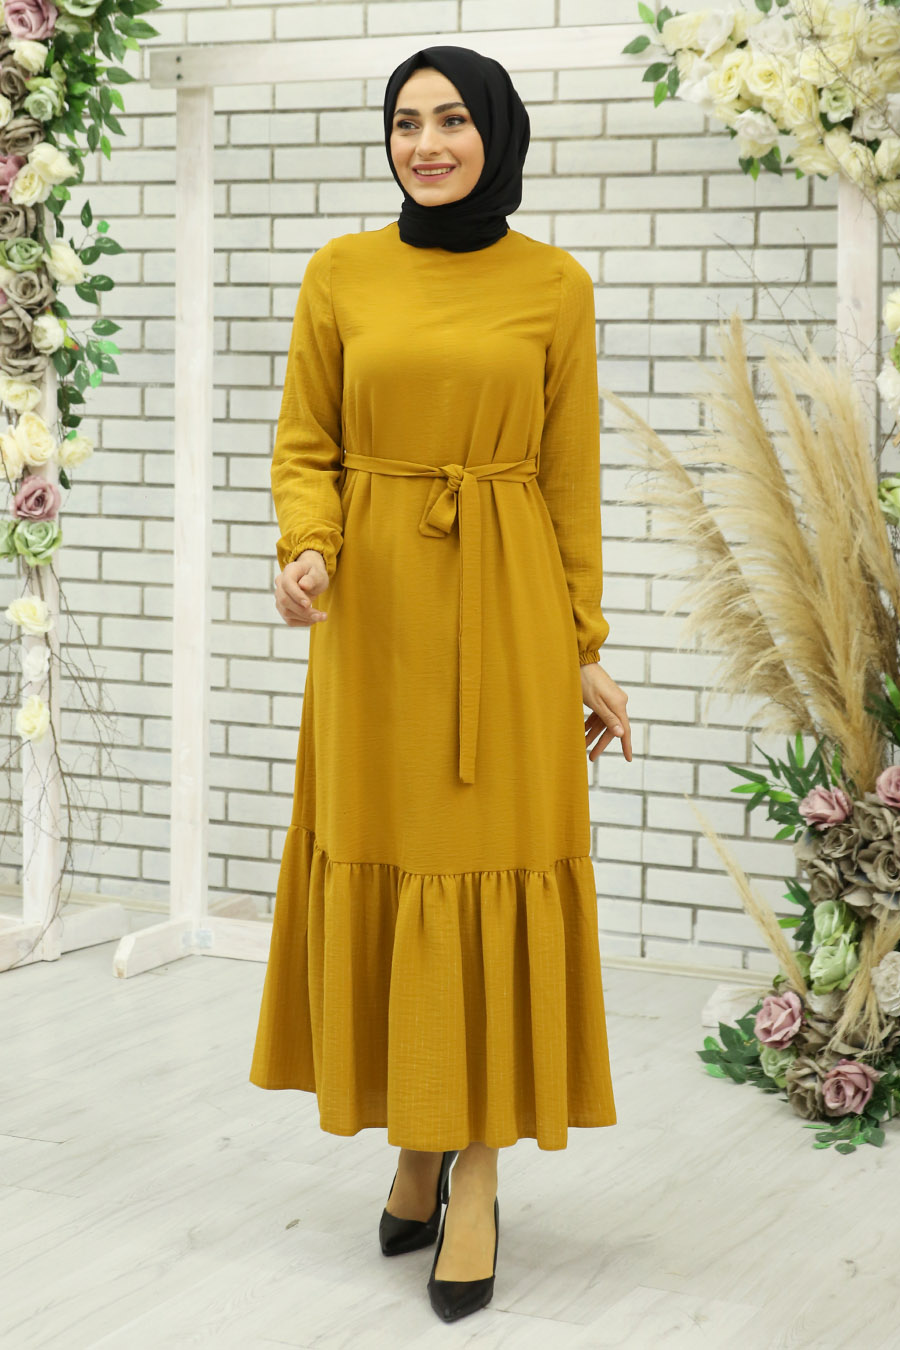 Mustard Party Dress - Buy Mustard Party Dress online in India